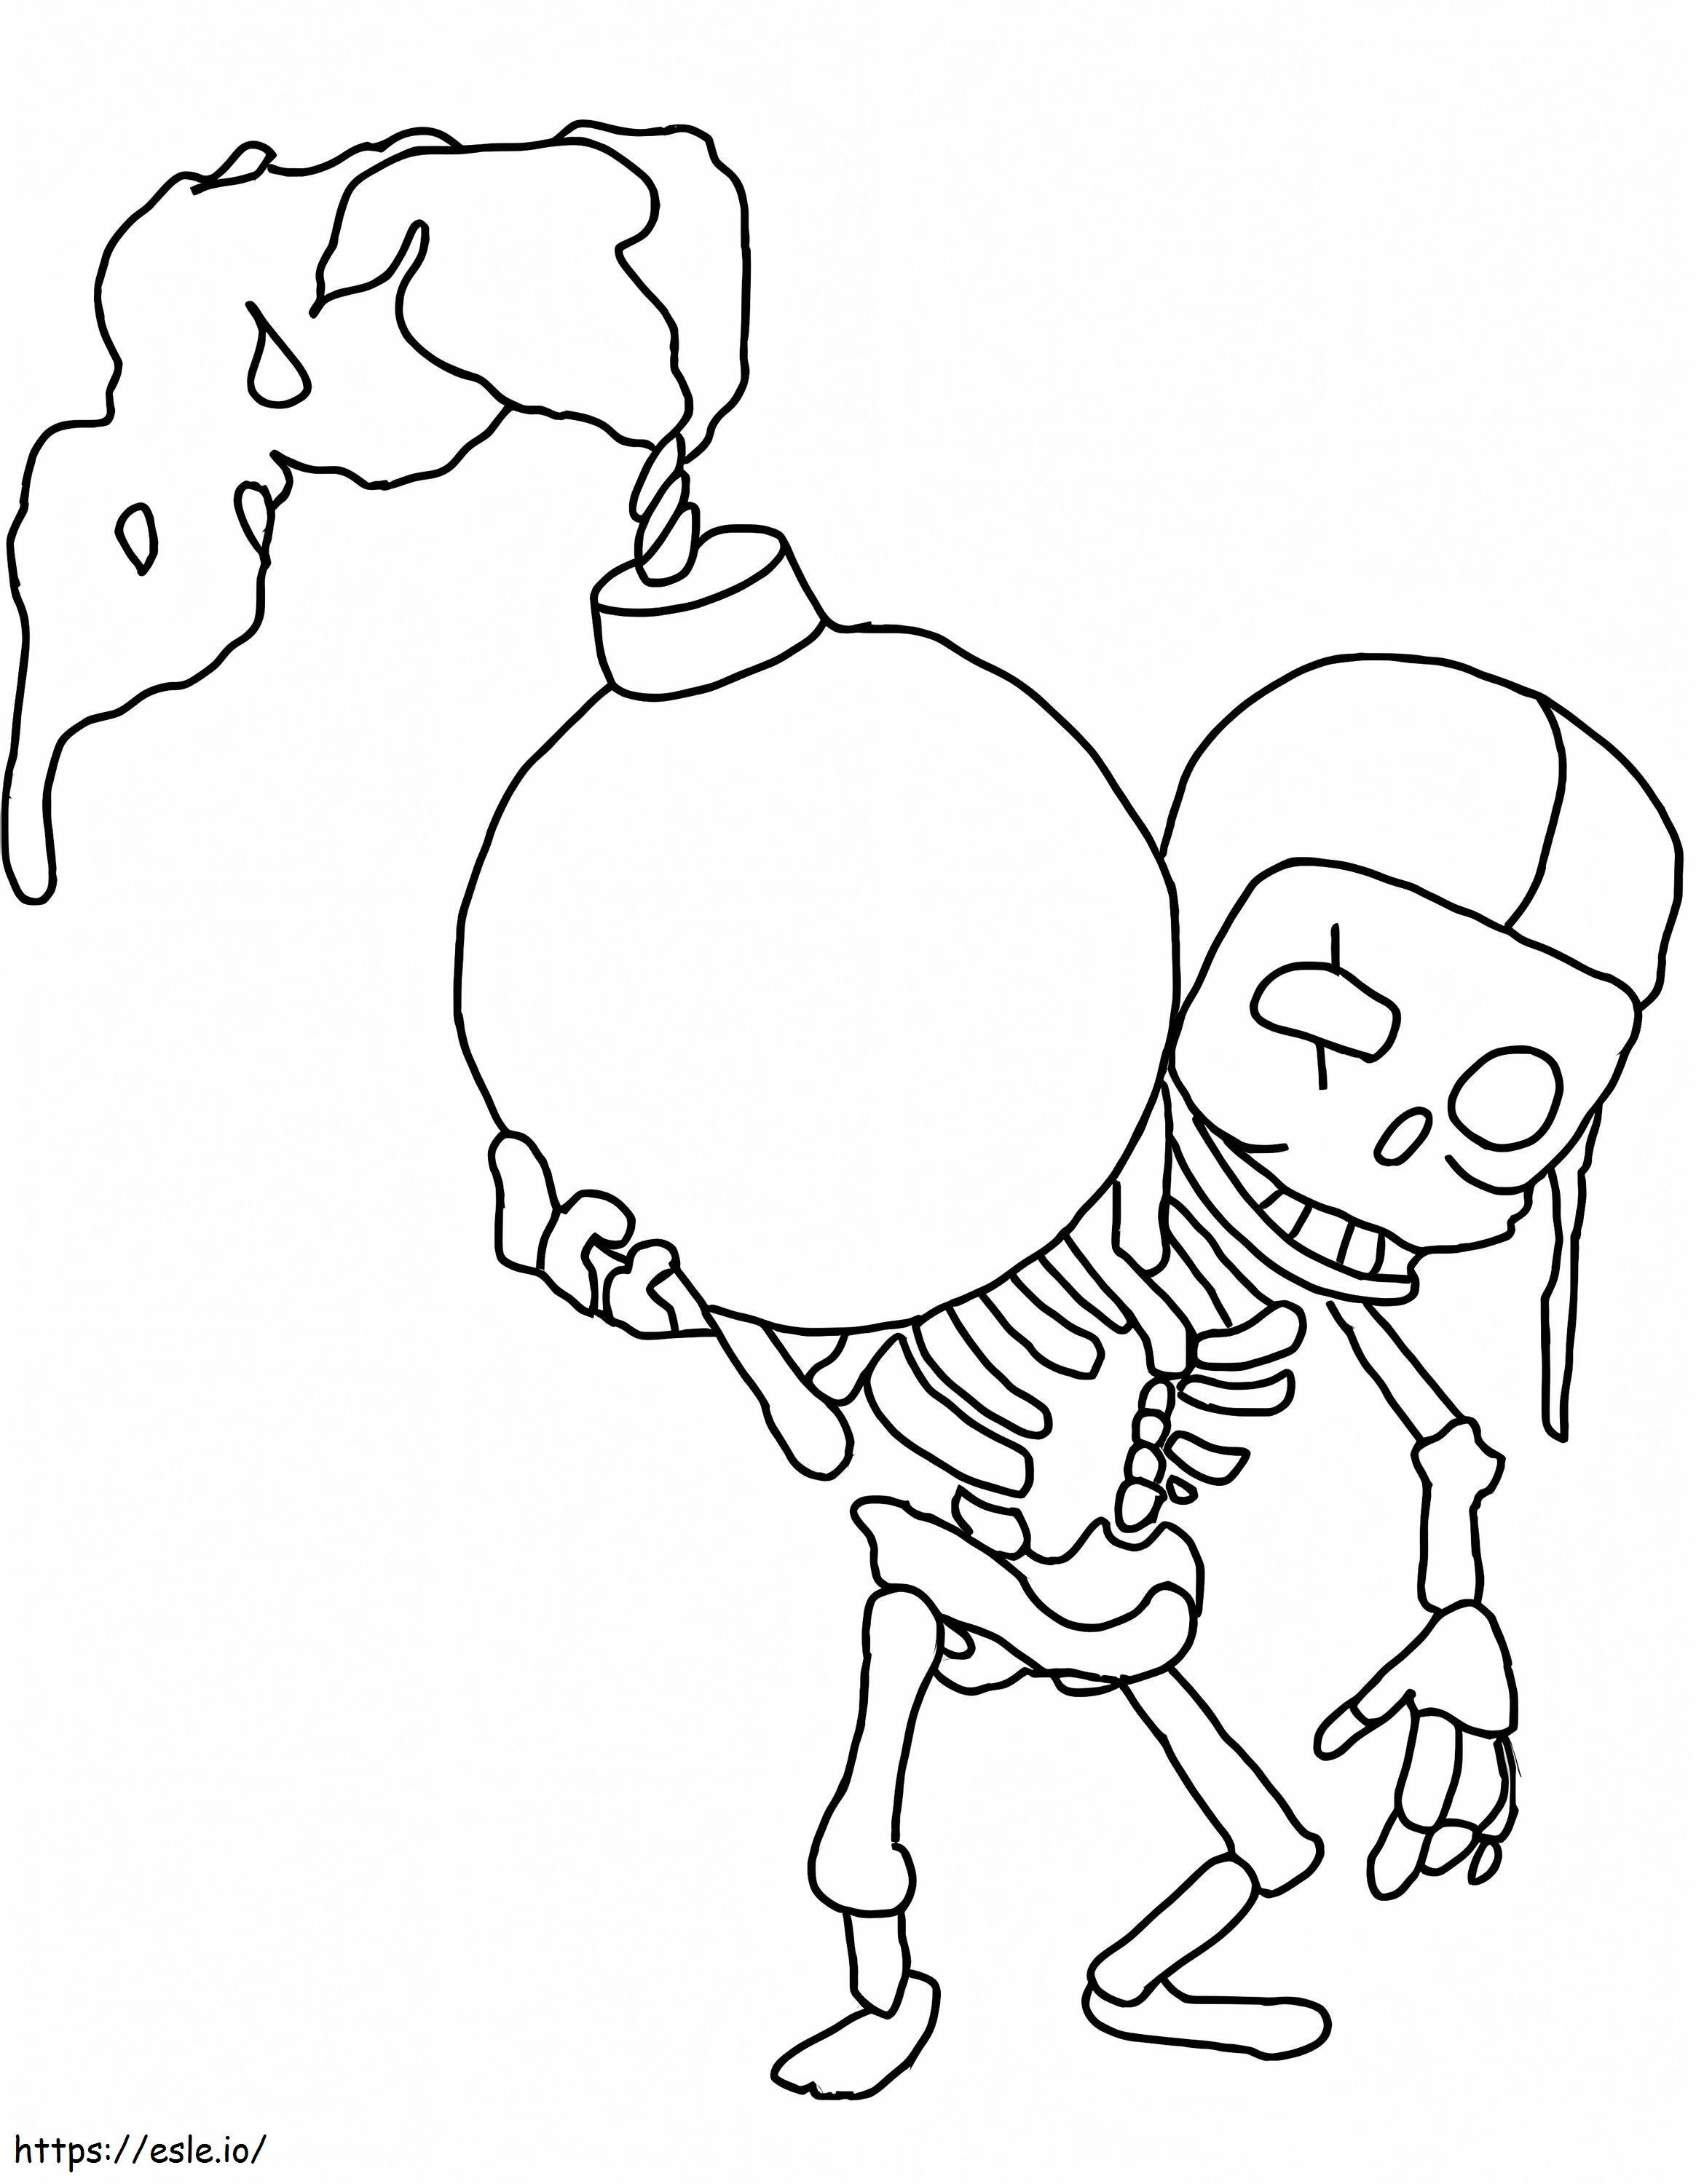 Army Wall Breaker coloring page